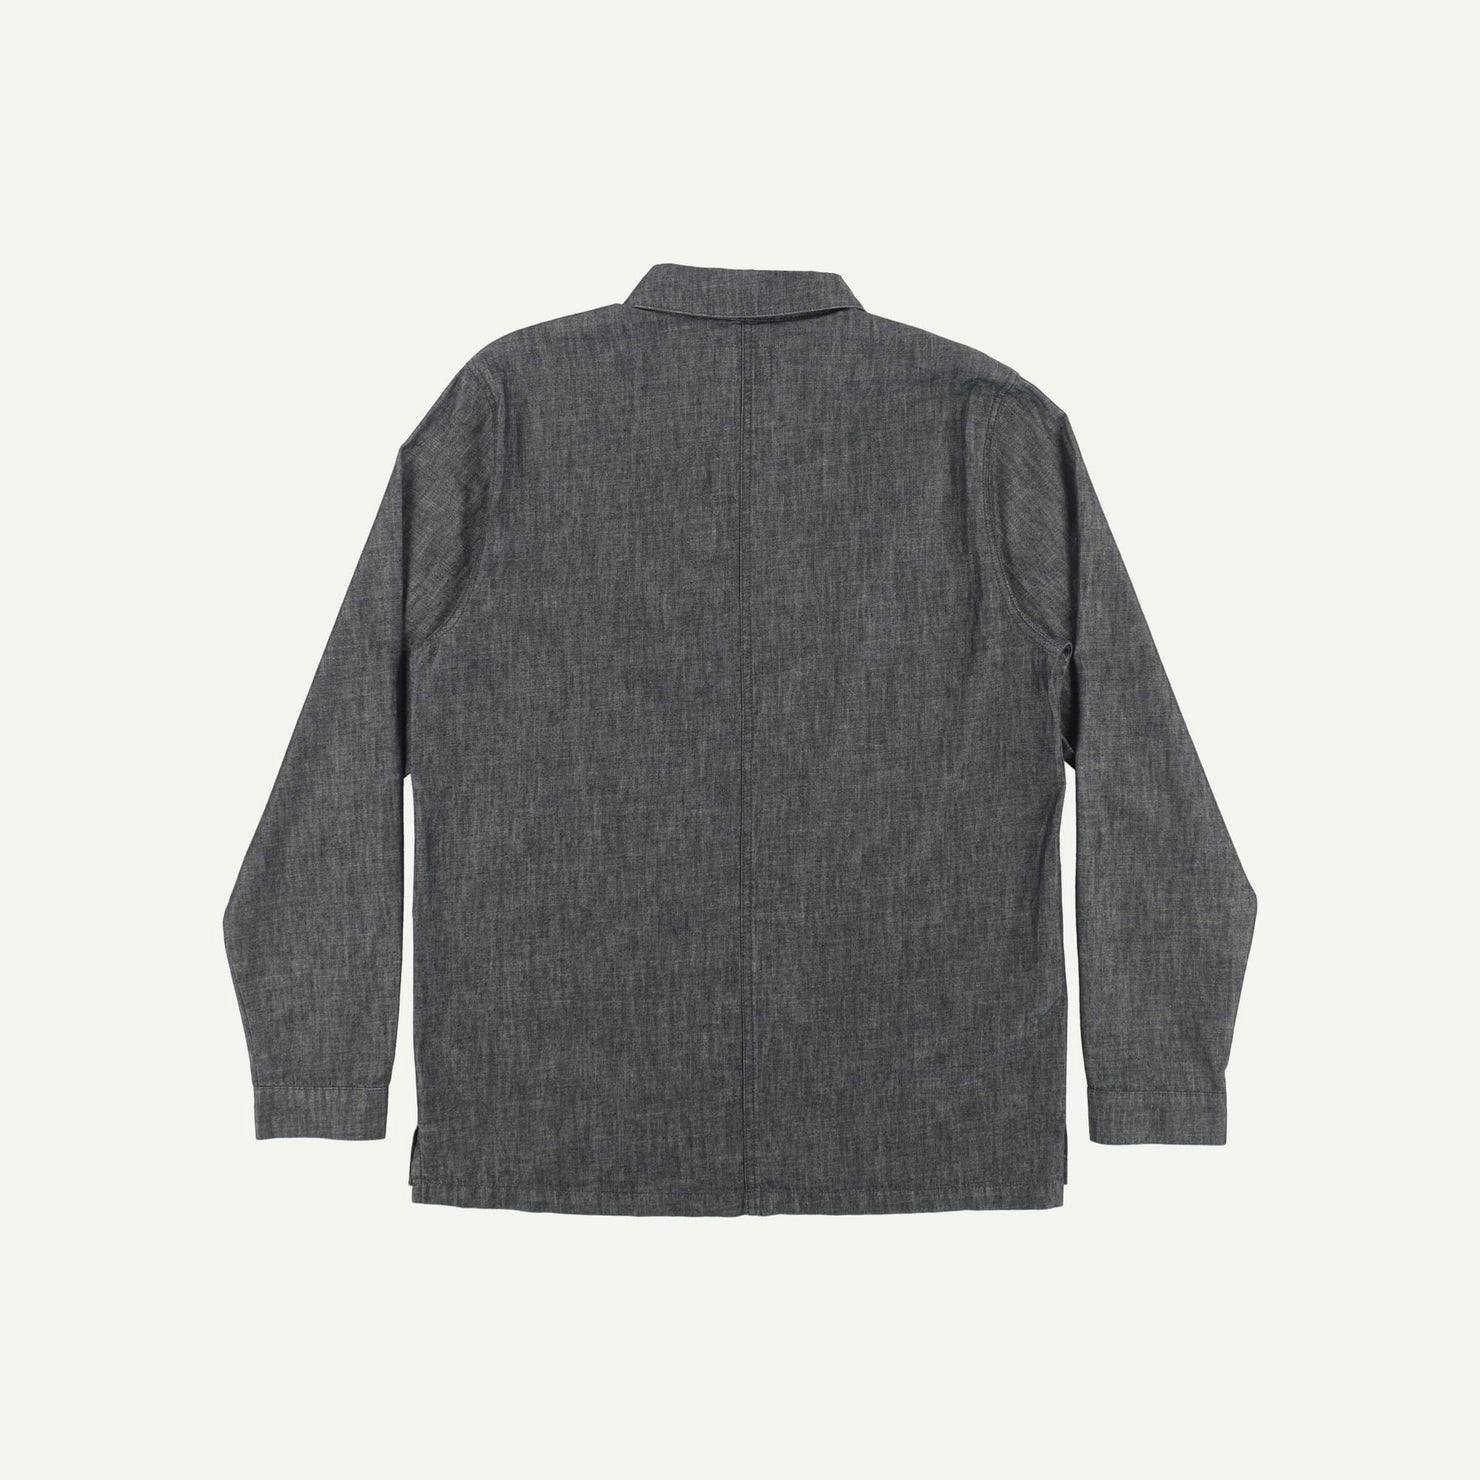 Finisterre As new Grey Shirt